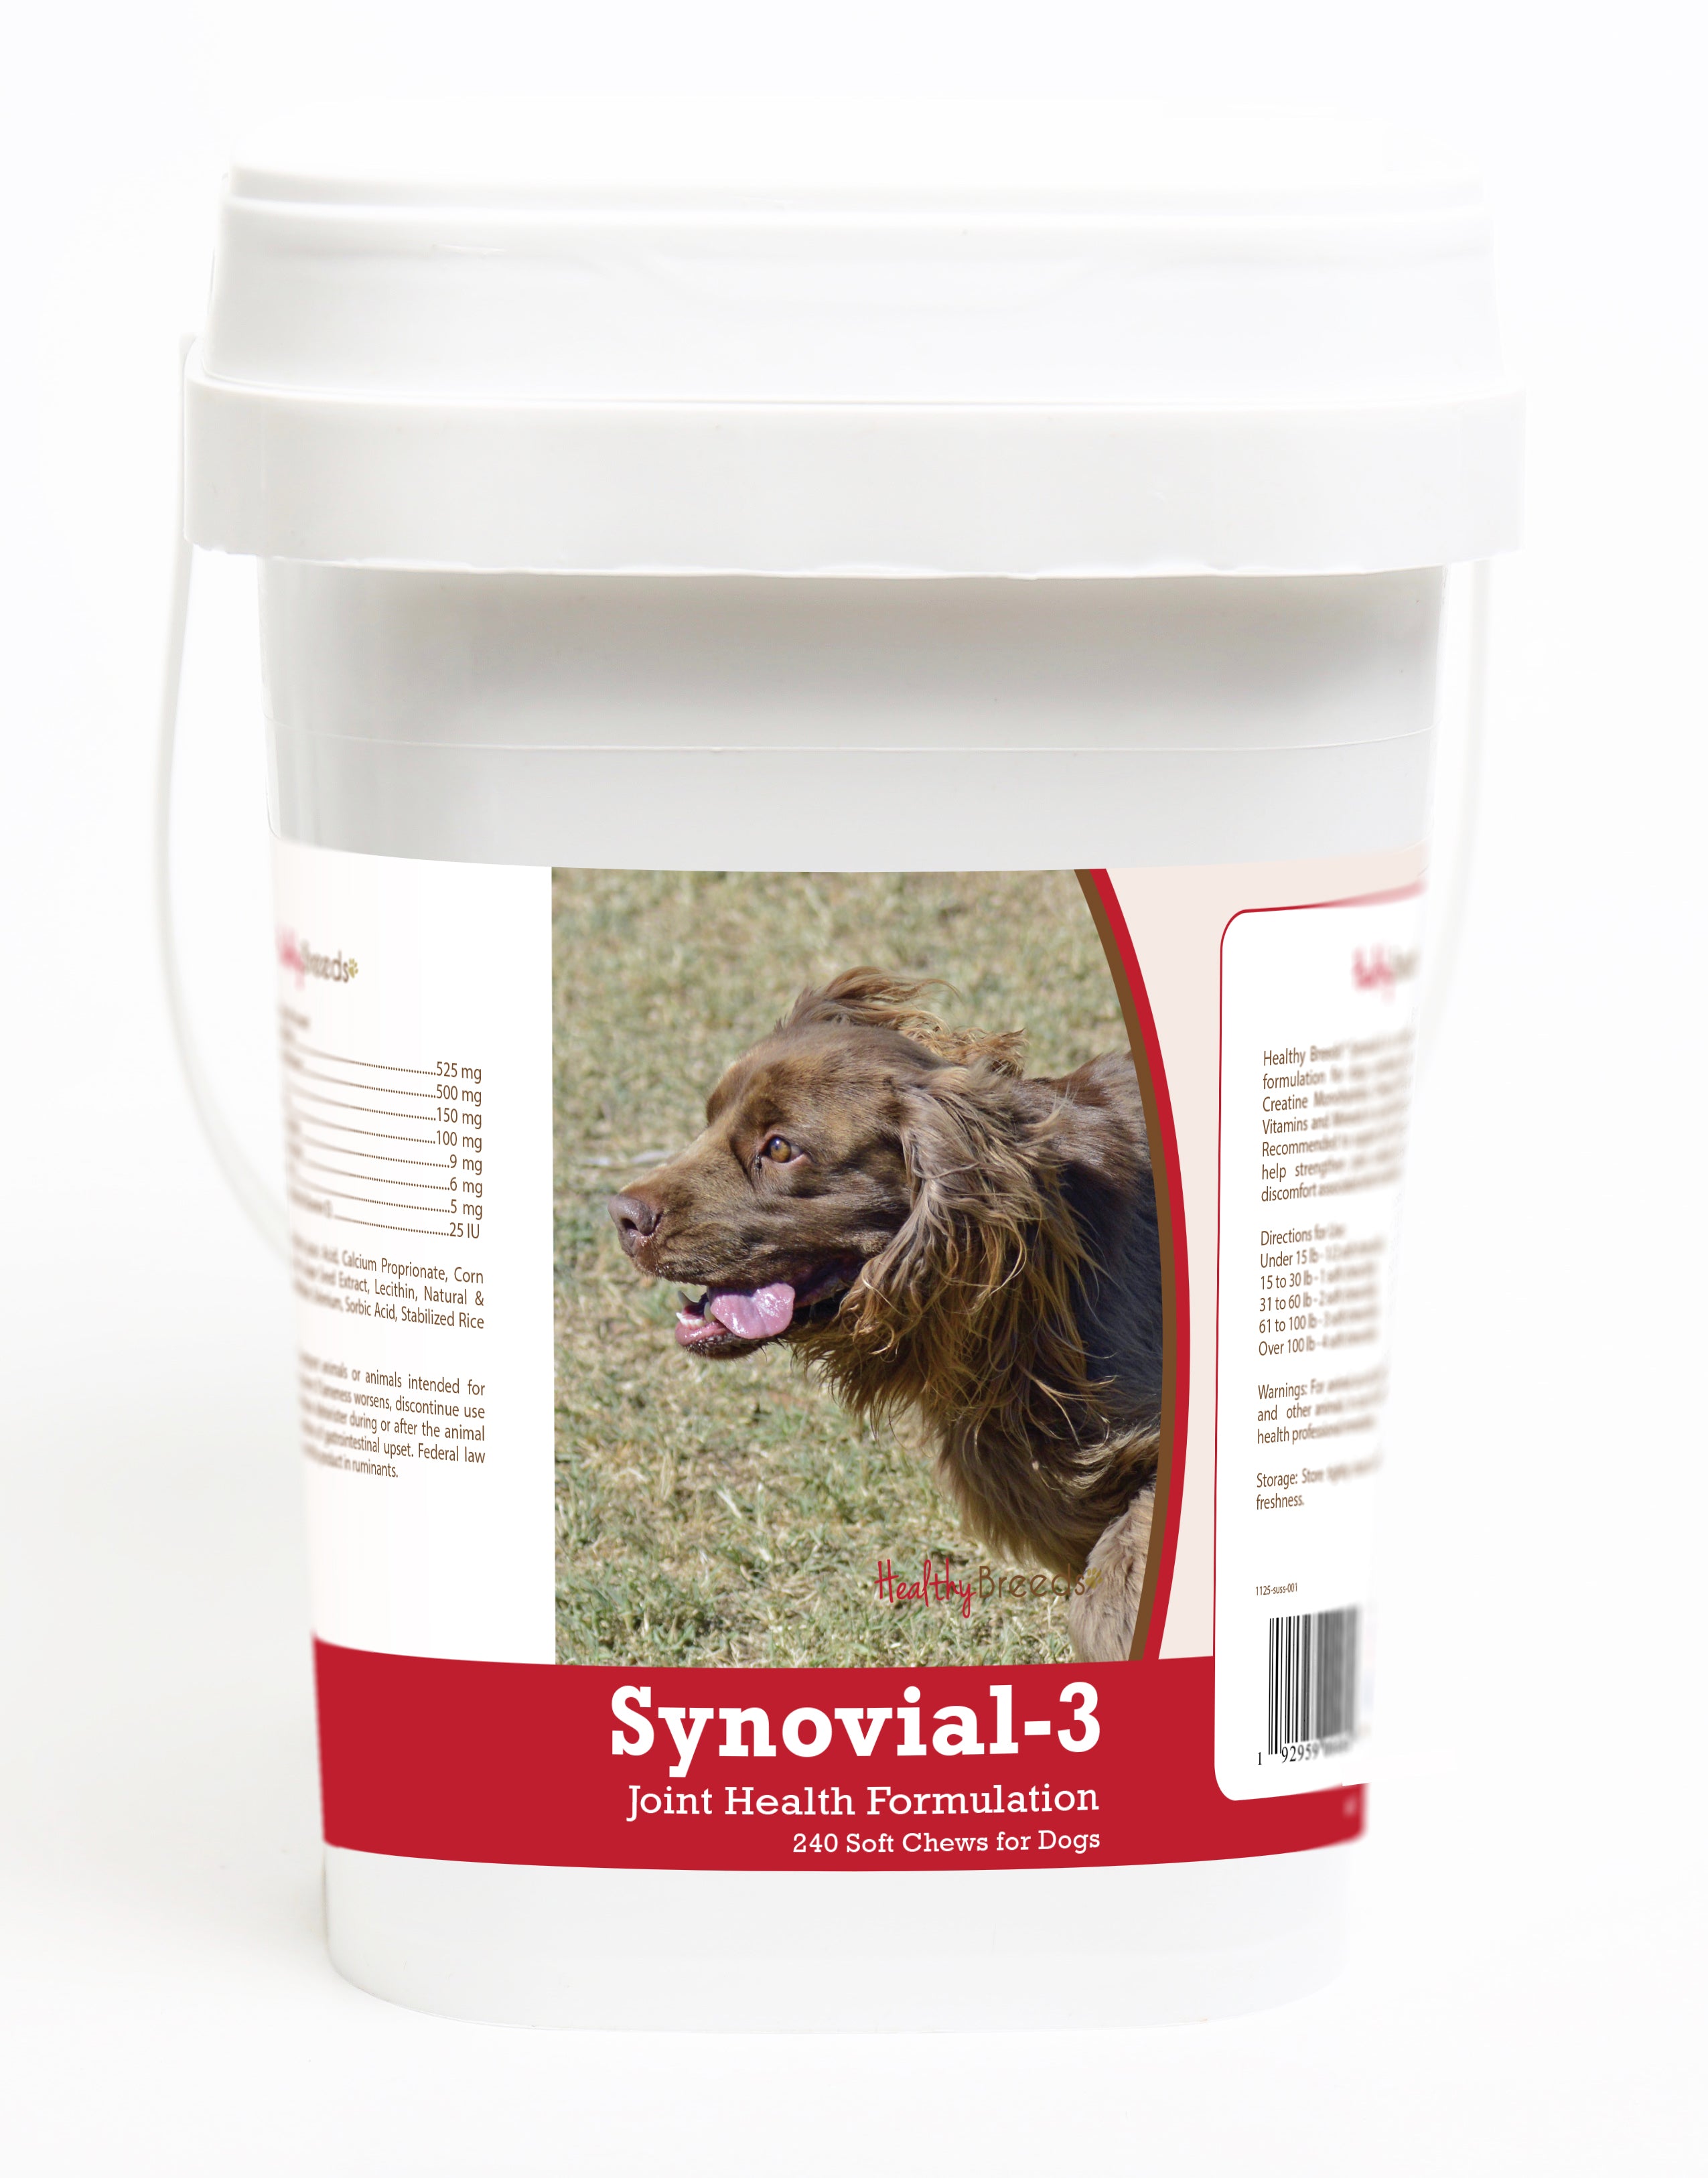 Sussex Spaniel Synovial-3 Joint Health Formulation Soft Chews 240 Count